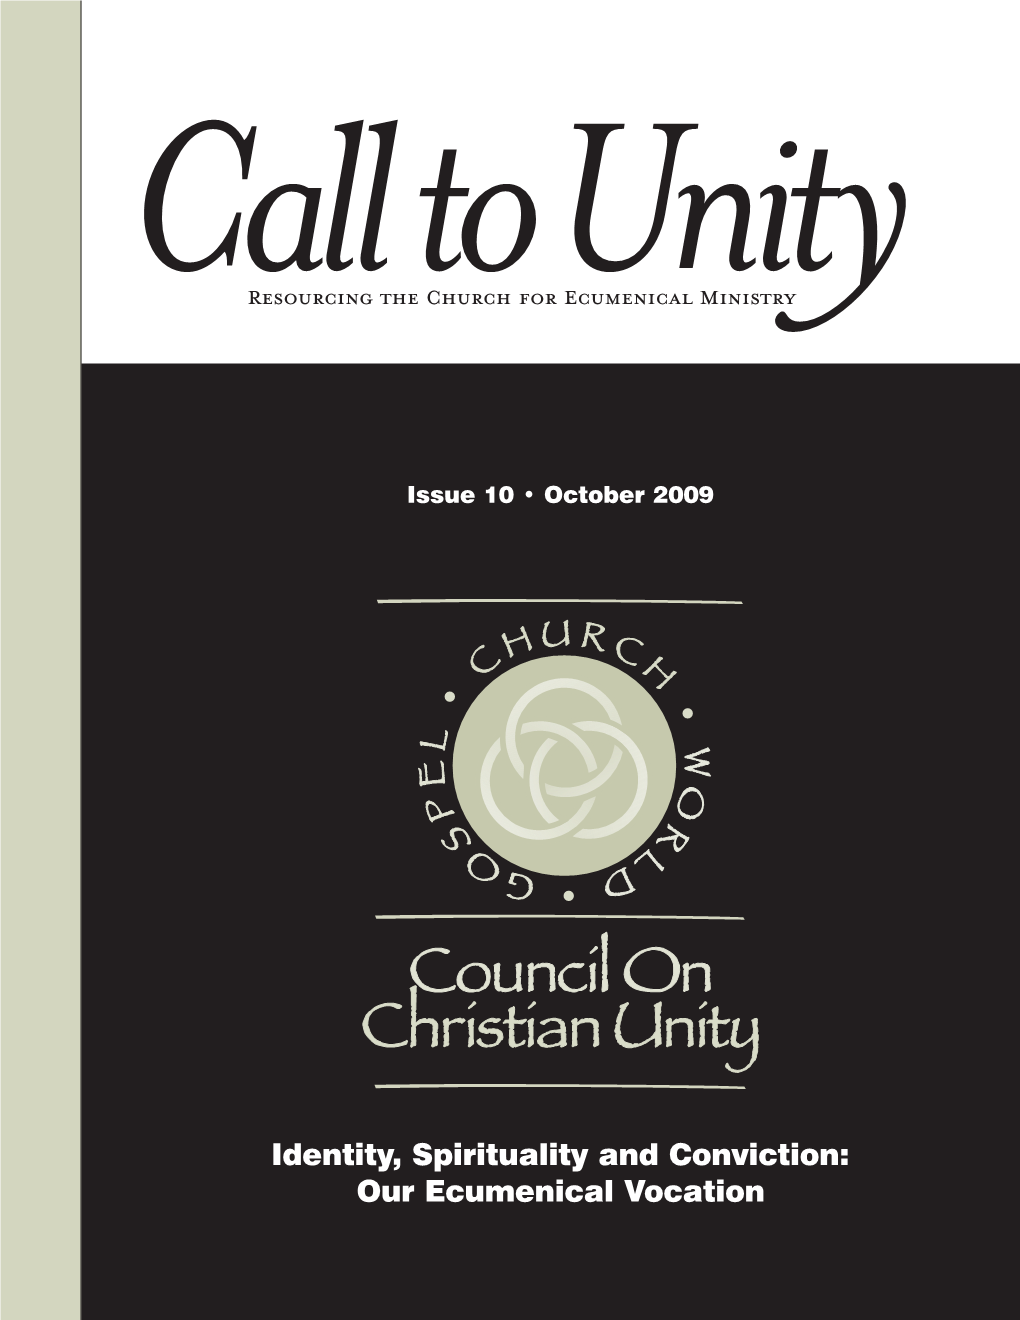 Call to Unity #10 Front Mtr.P65